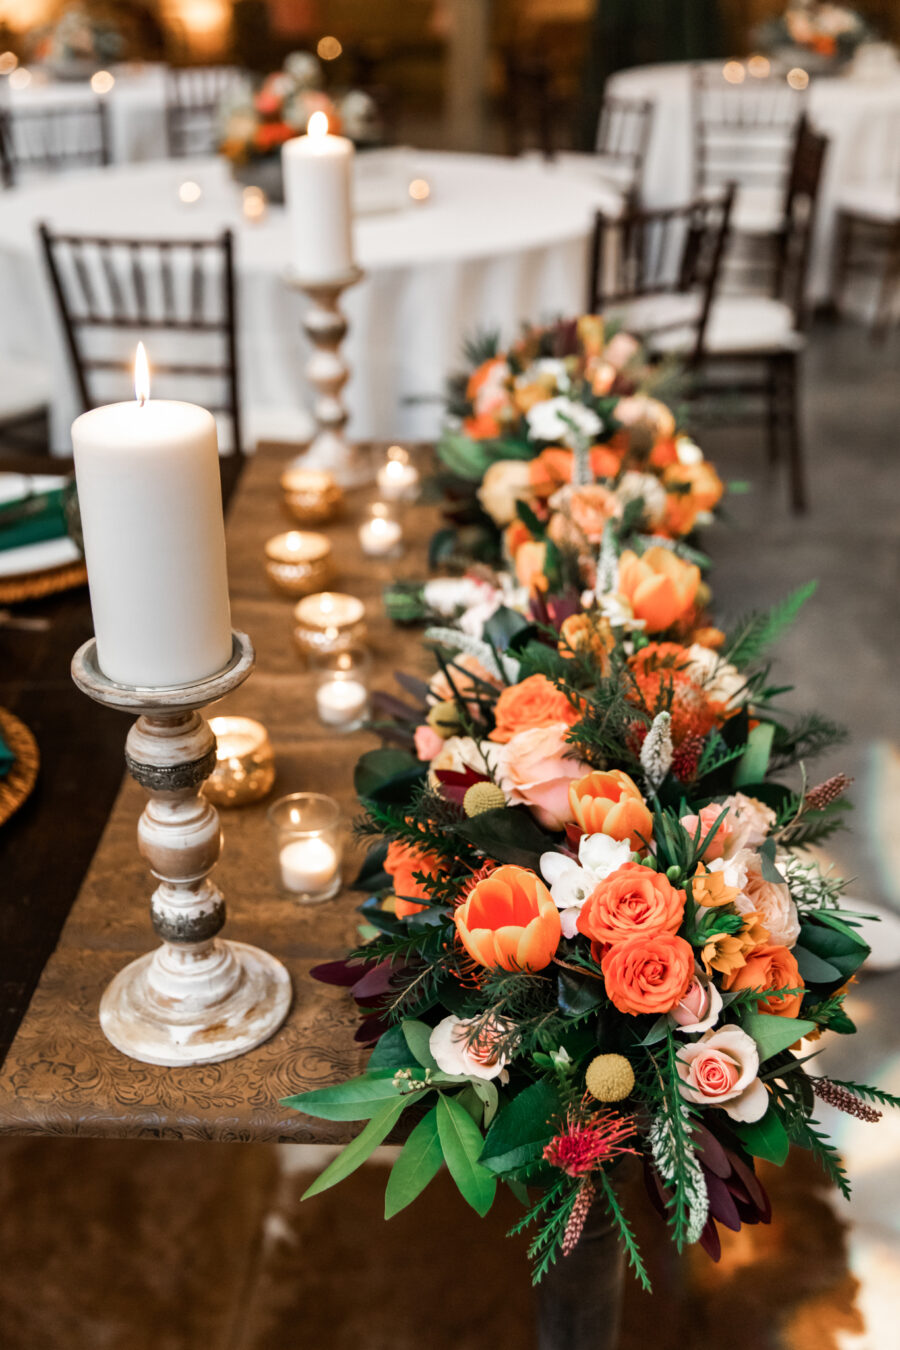 Floral wedding centerpieces: Western Inspired Wedding by Laurie D'Anne Events featured on Nashville Bride Guide